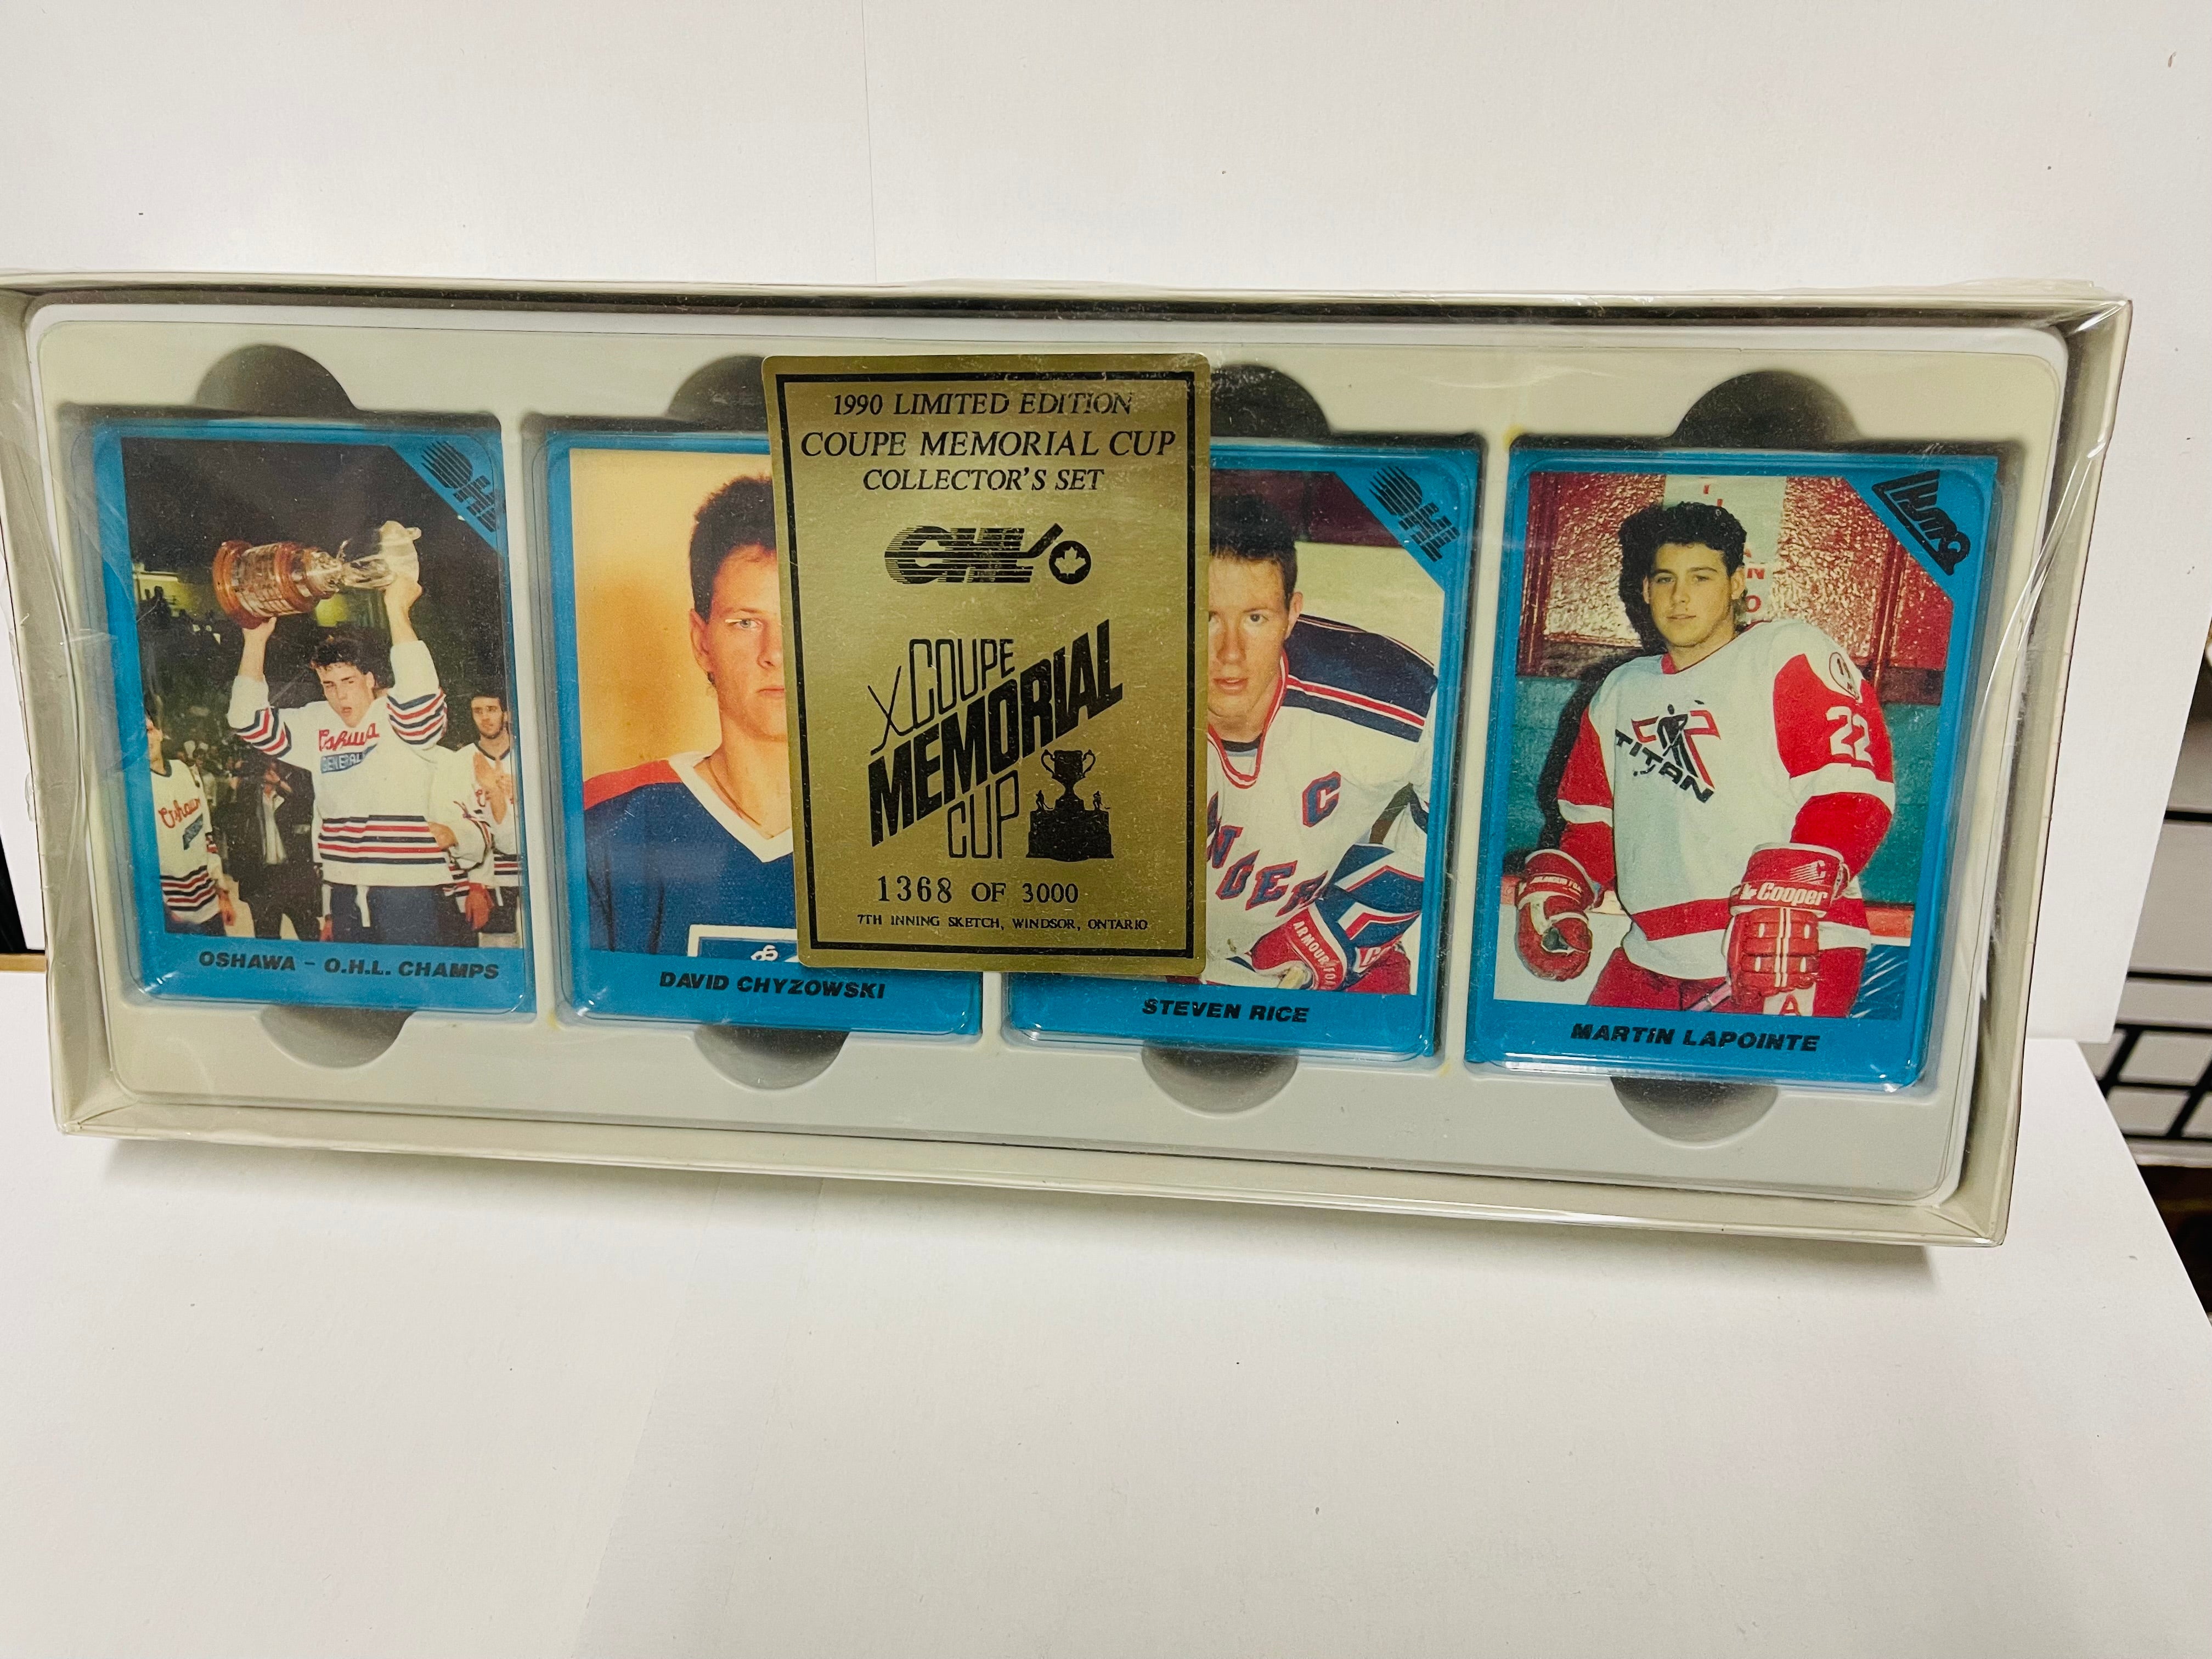 Memorial Cup Hockey rare numbered factory card set 1990